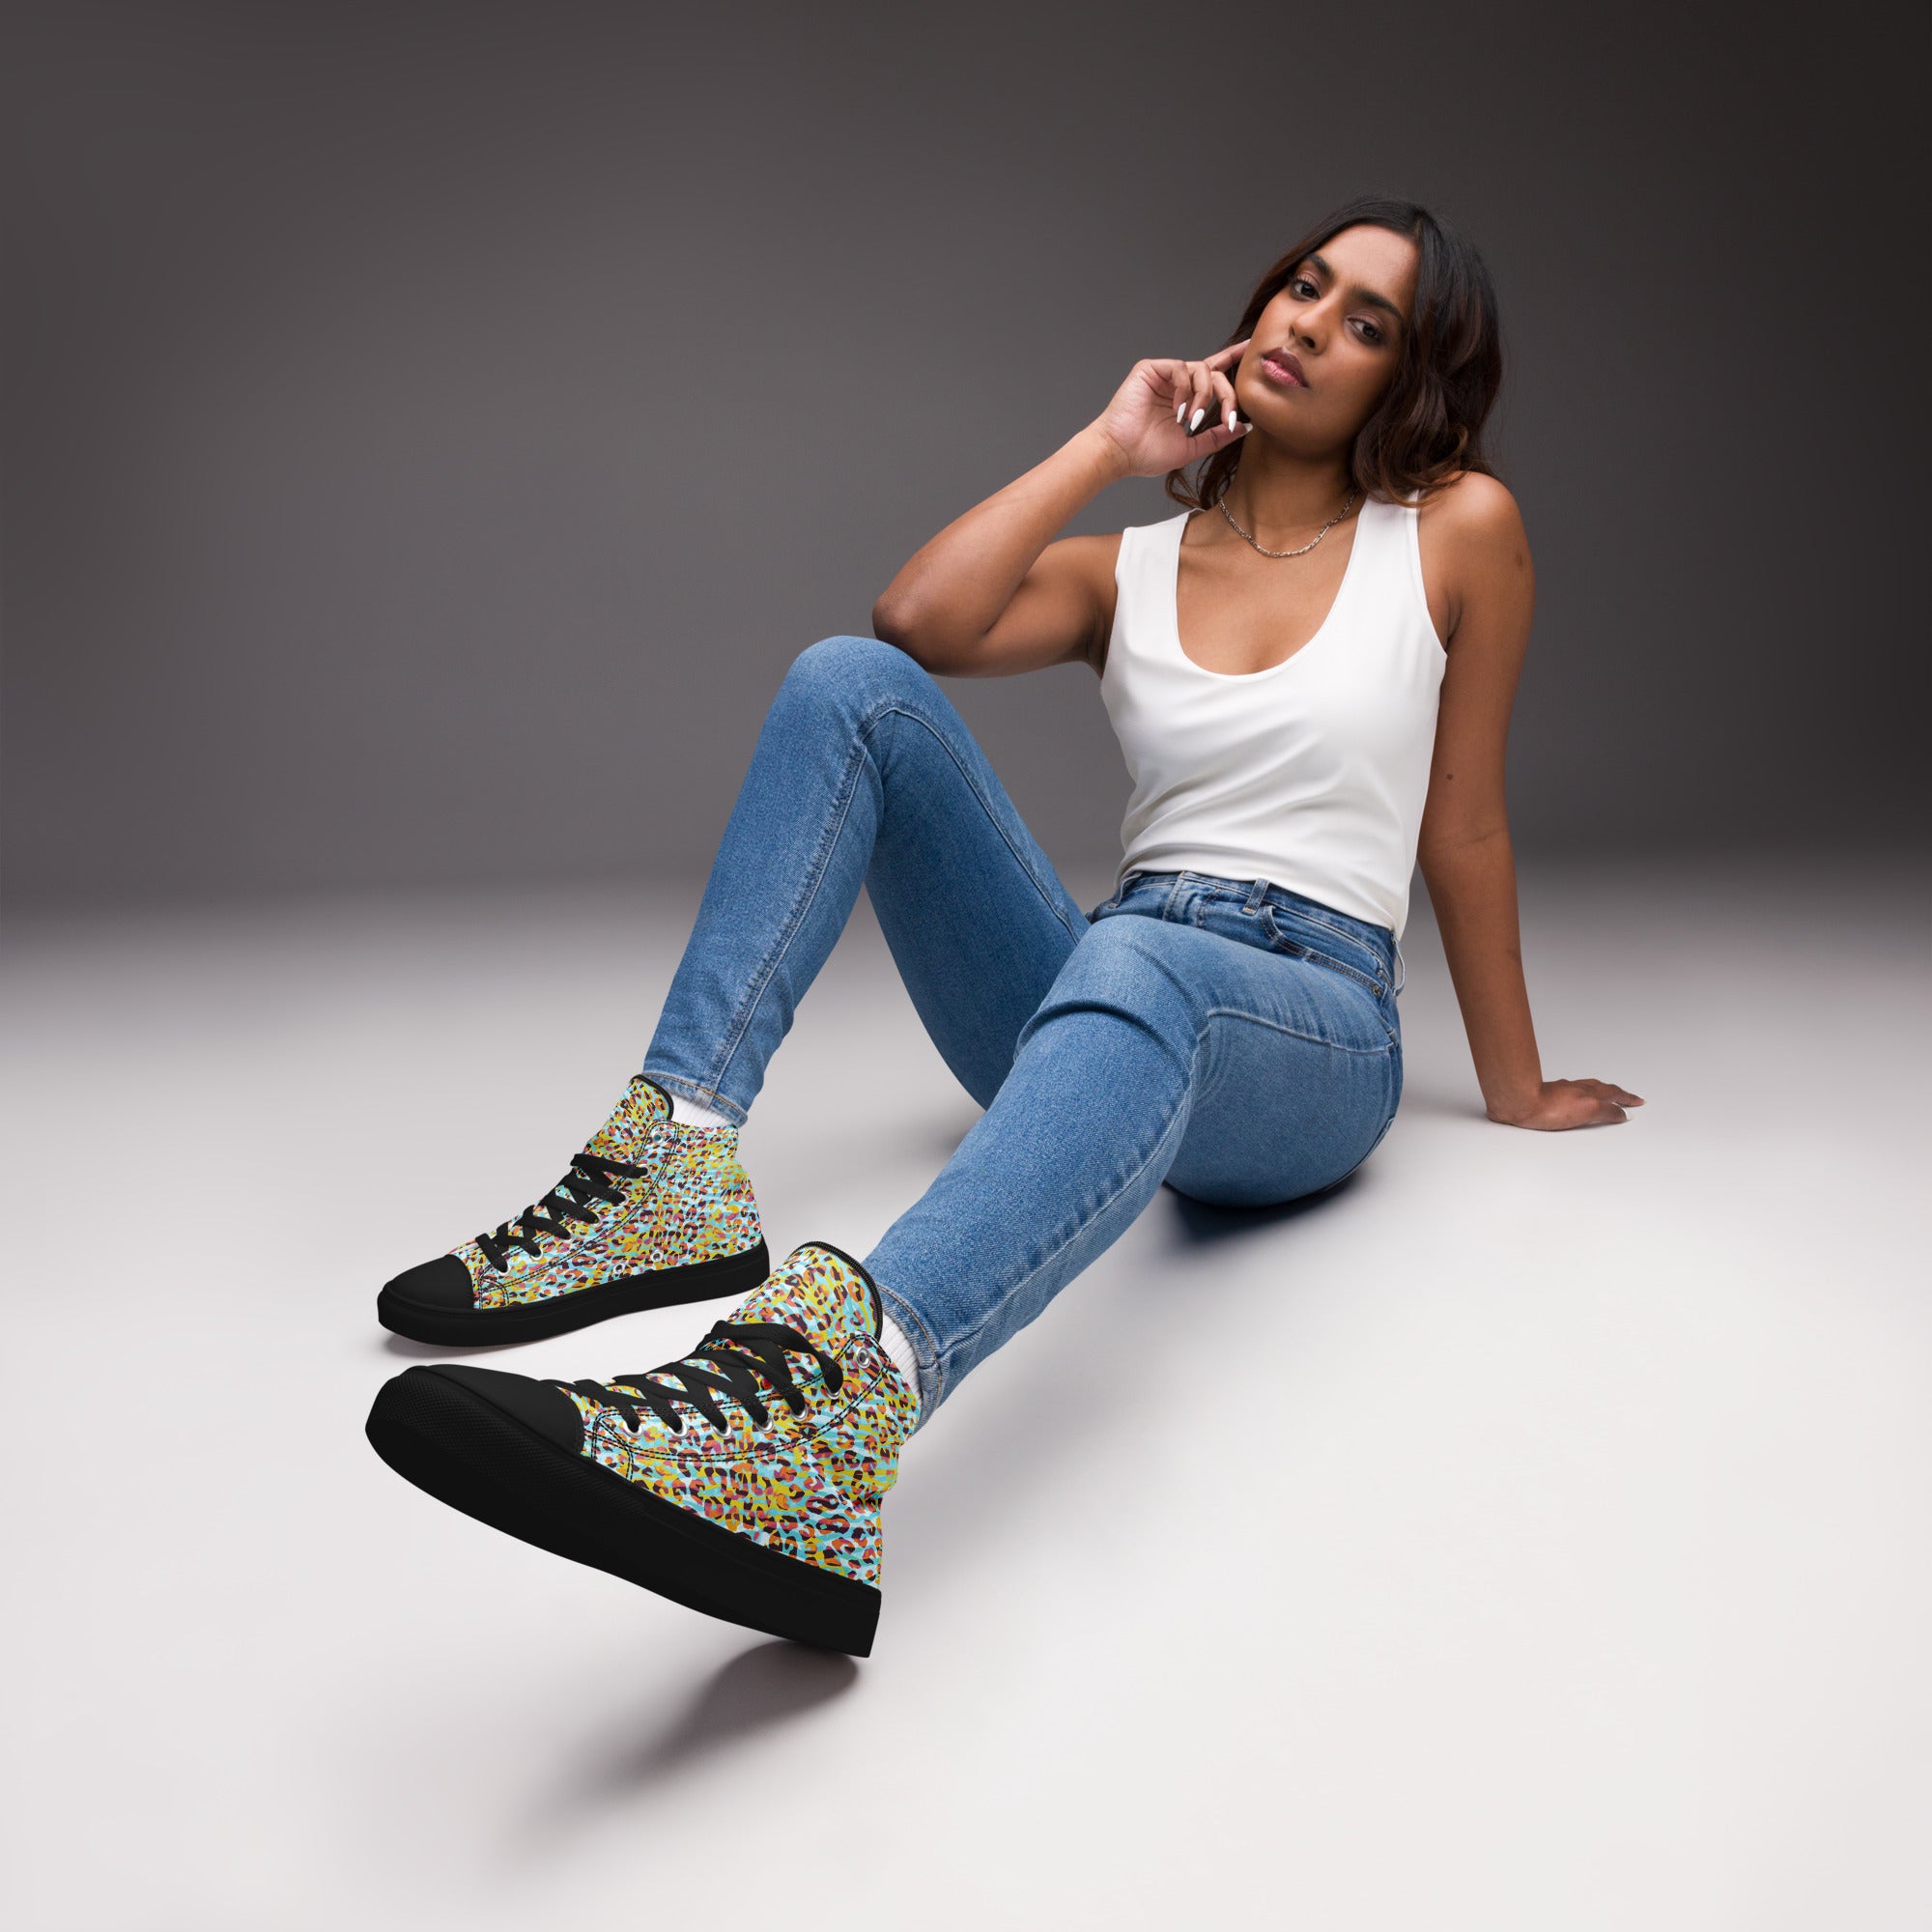 Women’s high top canvas shoes- Zebra and Leopard Print Cyan with Yellow